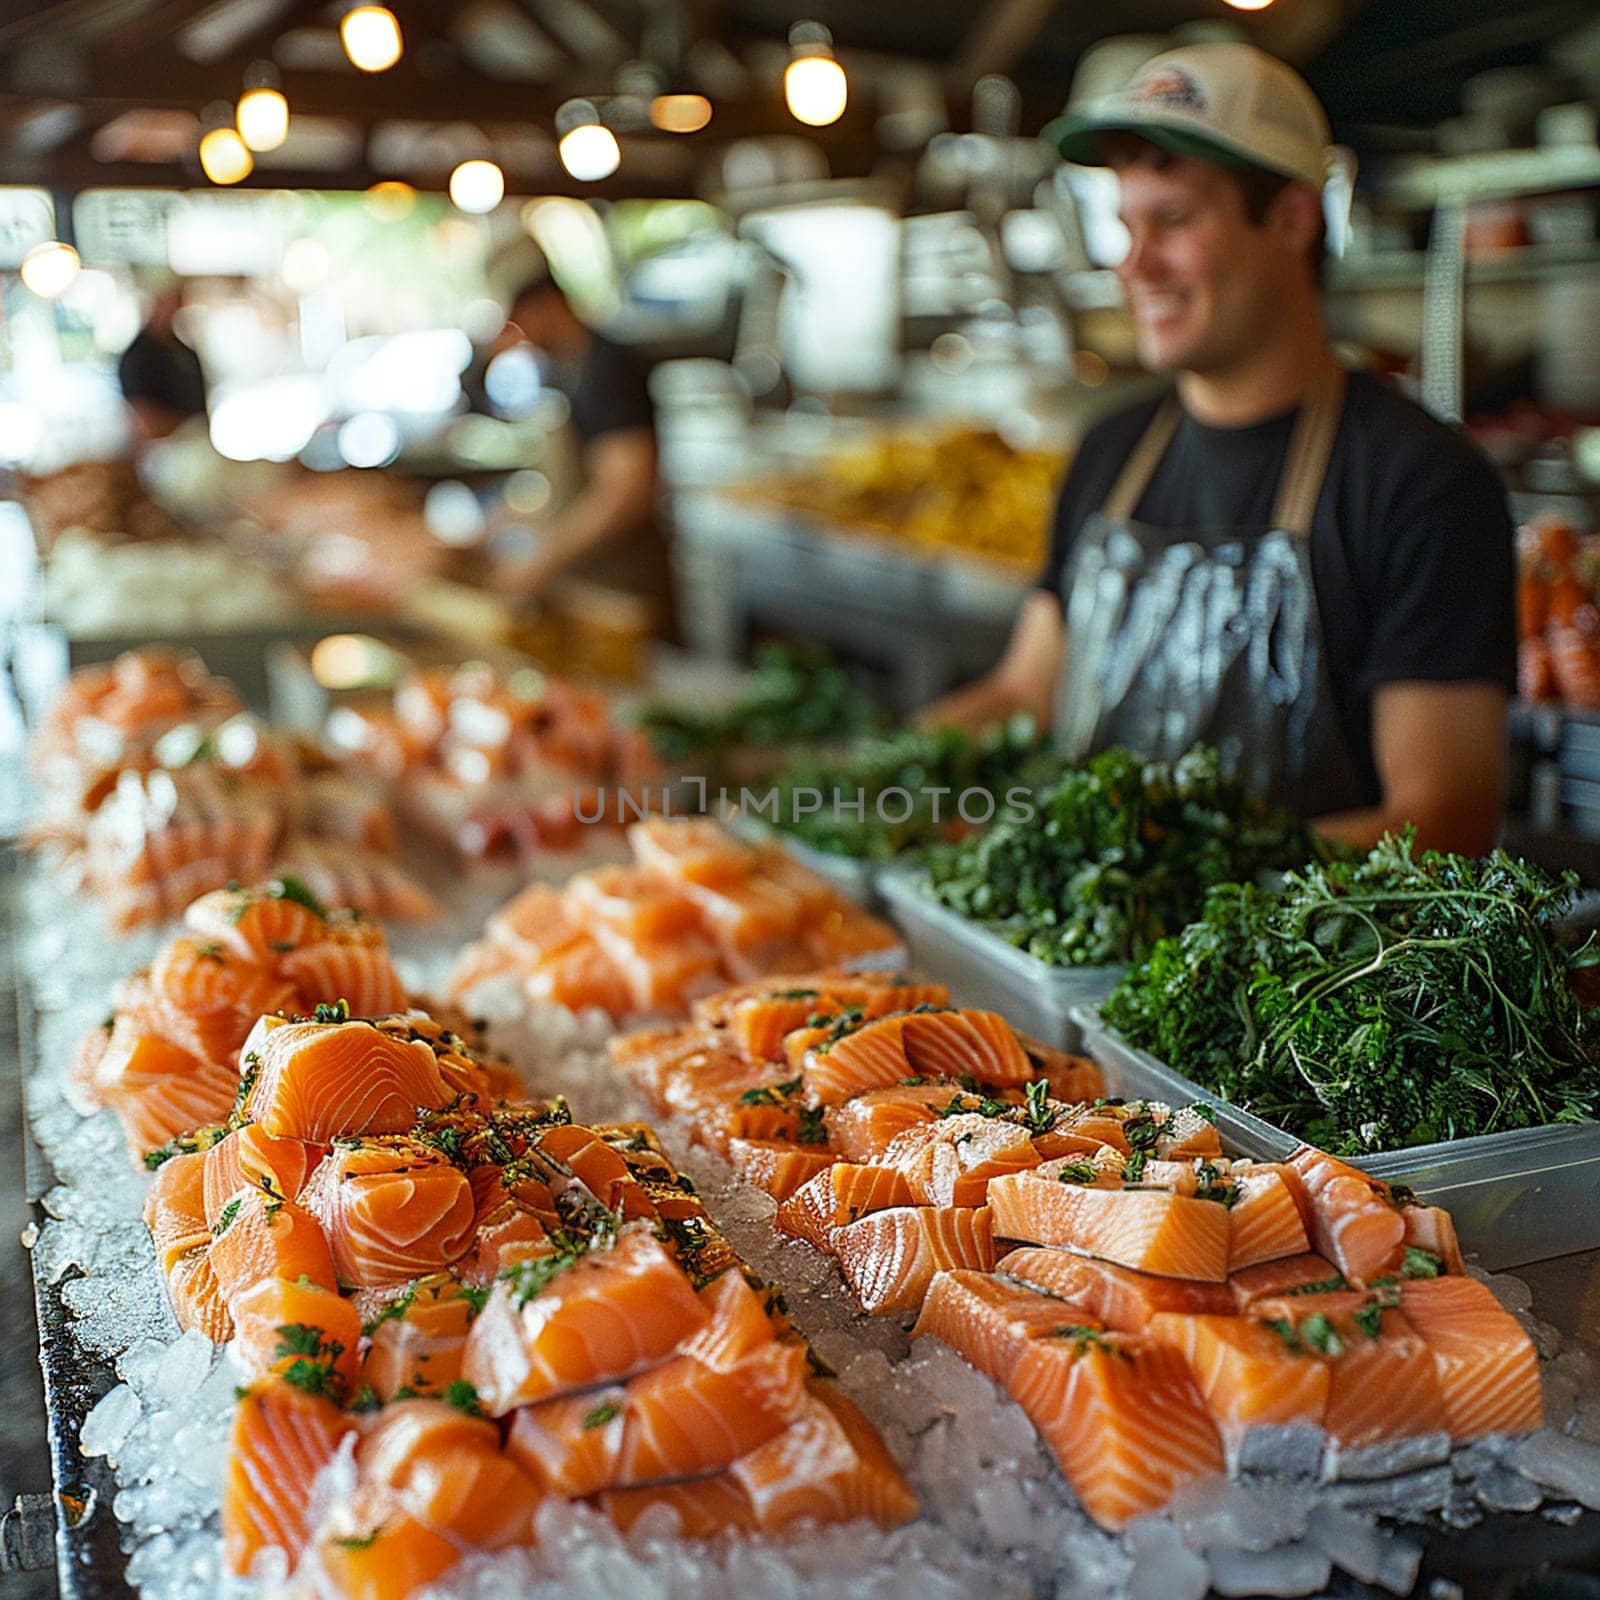 Fresh Seafood Market Nets Ocean Bounty in Business of Fishmongery by Benzoix